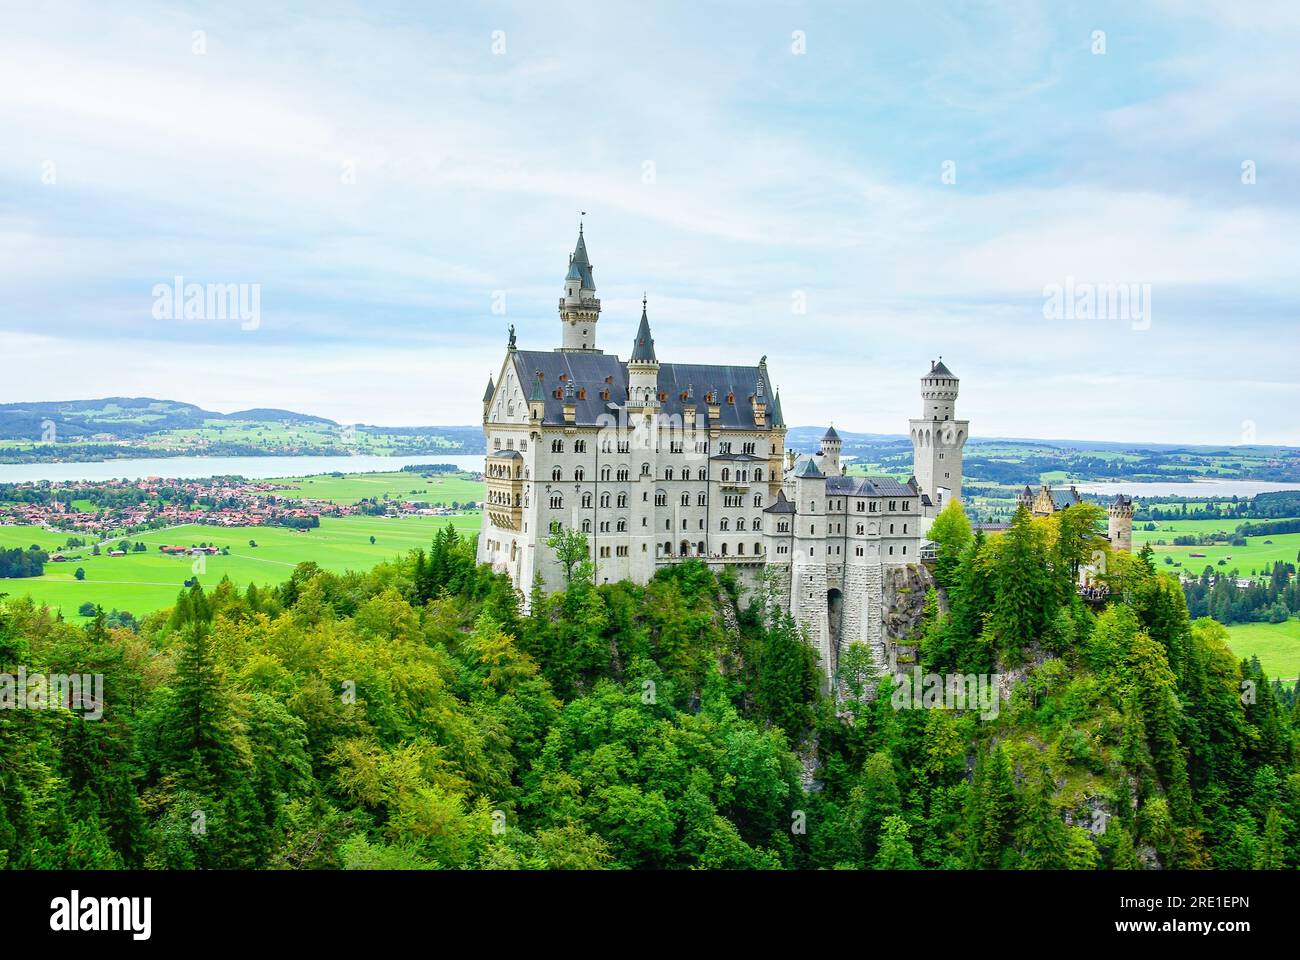 World famous Neuschwanstein Castle of Bavaria's King Ludwig II is a late 19th century Neo-Romanesque style palace in Schwangau, Bavaria, Germany. Stock Photo